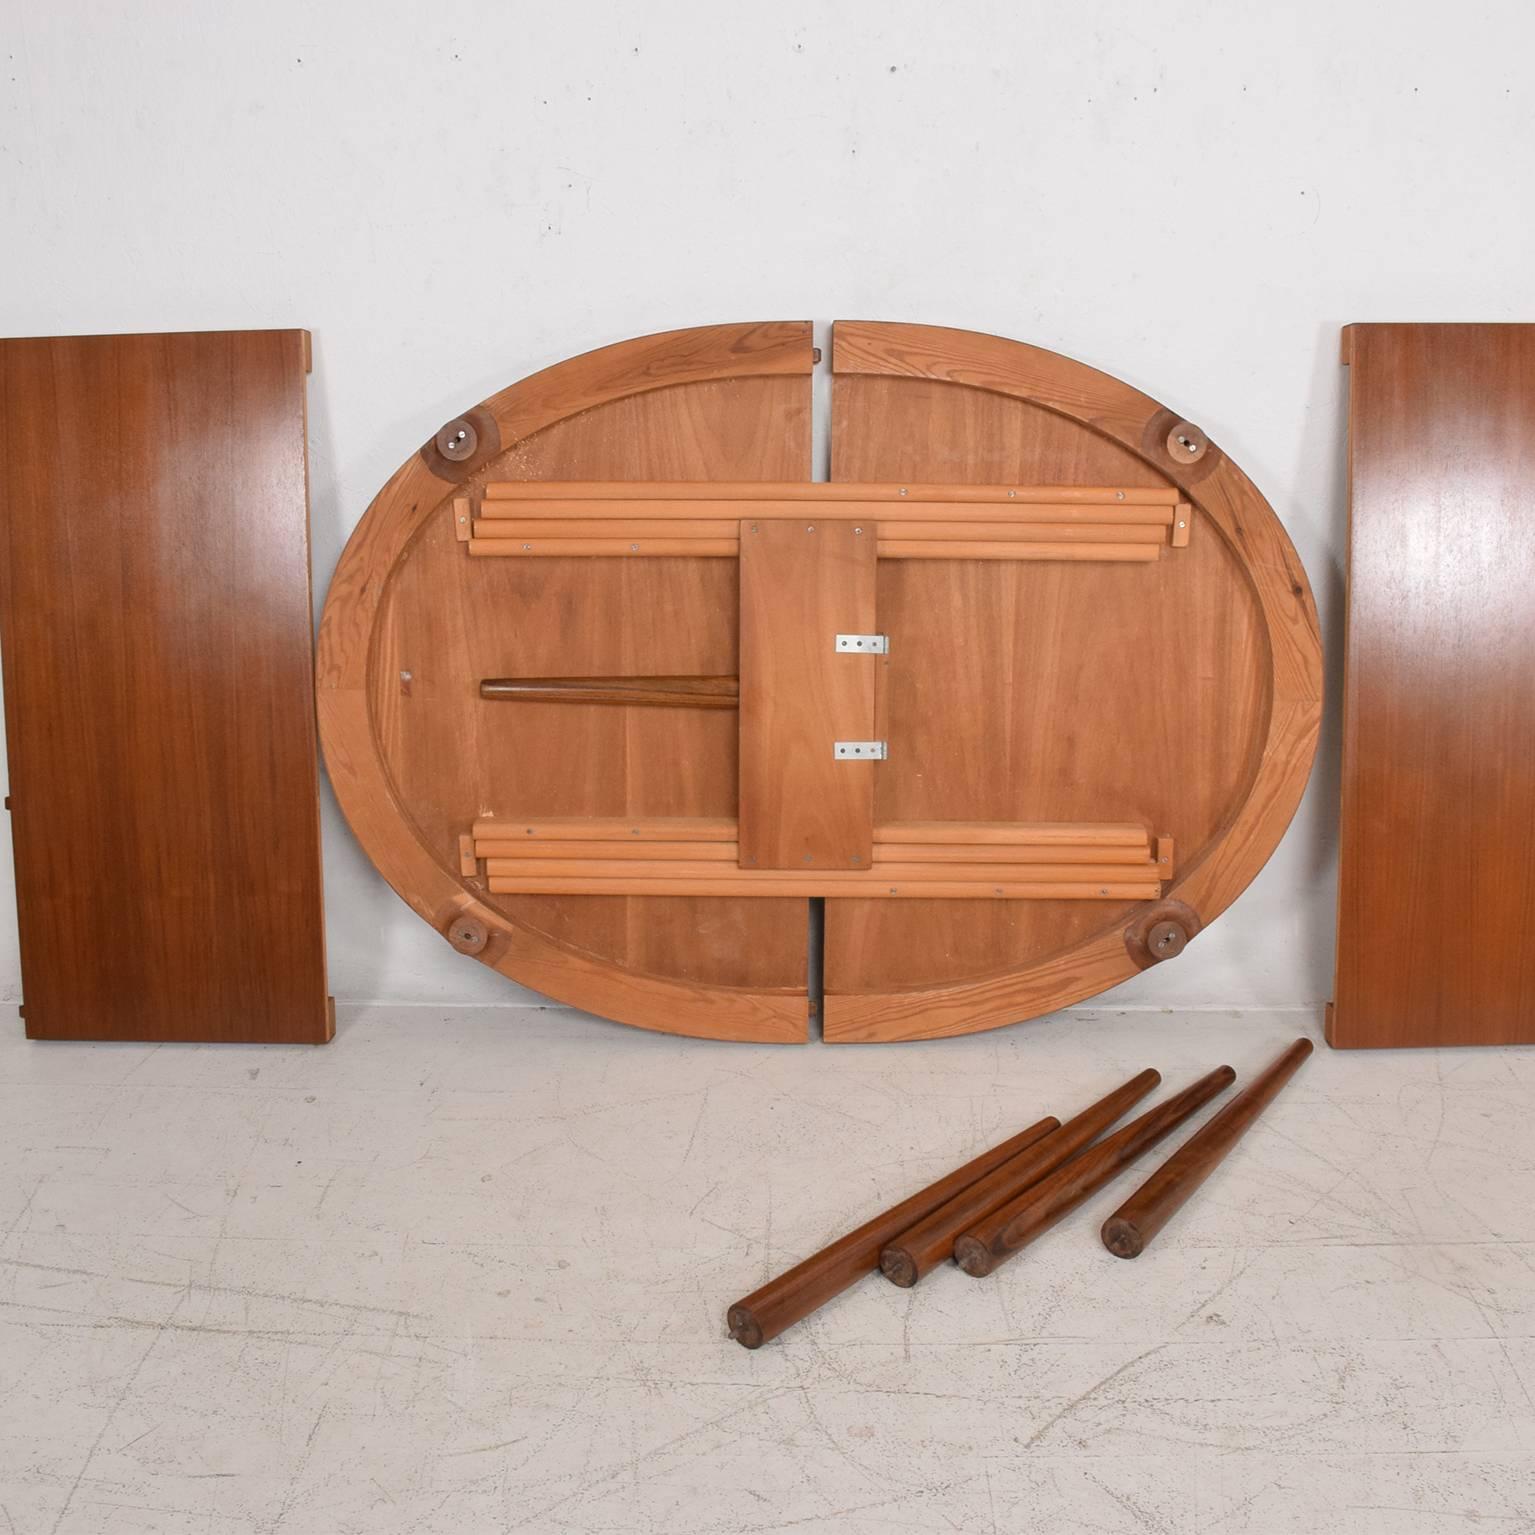 Midcentury Danish Modern Teak Dining Table in Excellent Condition 1